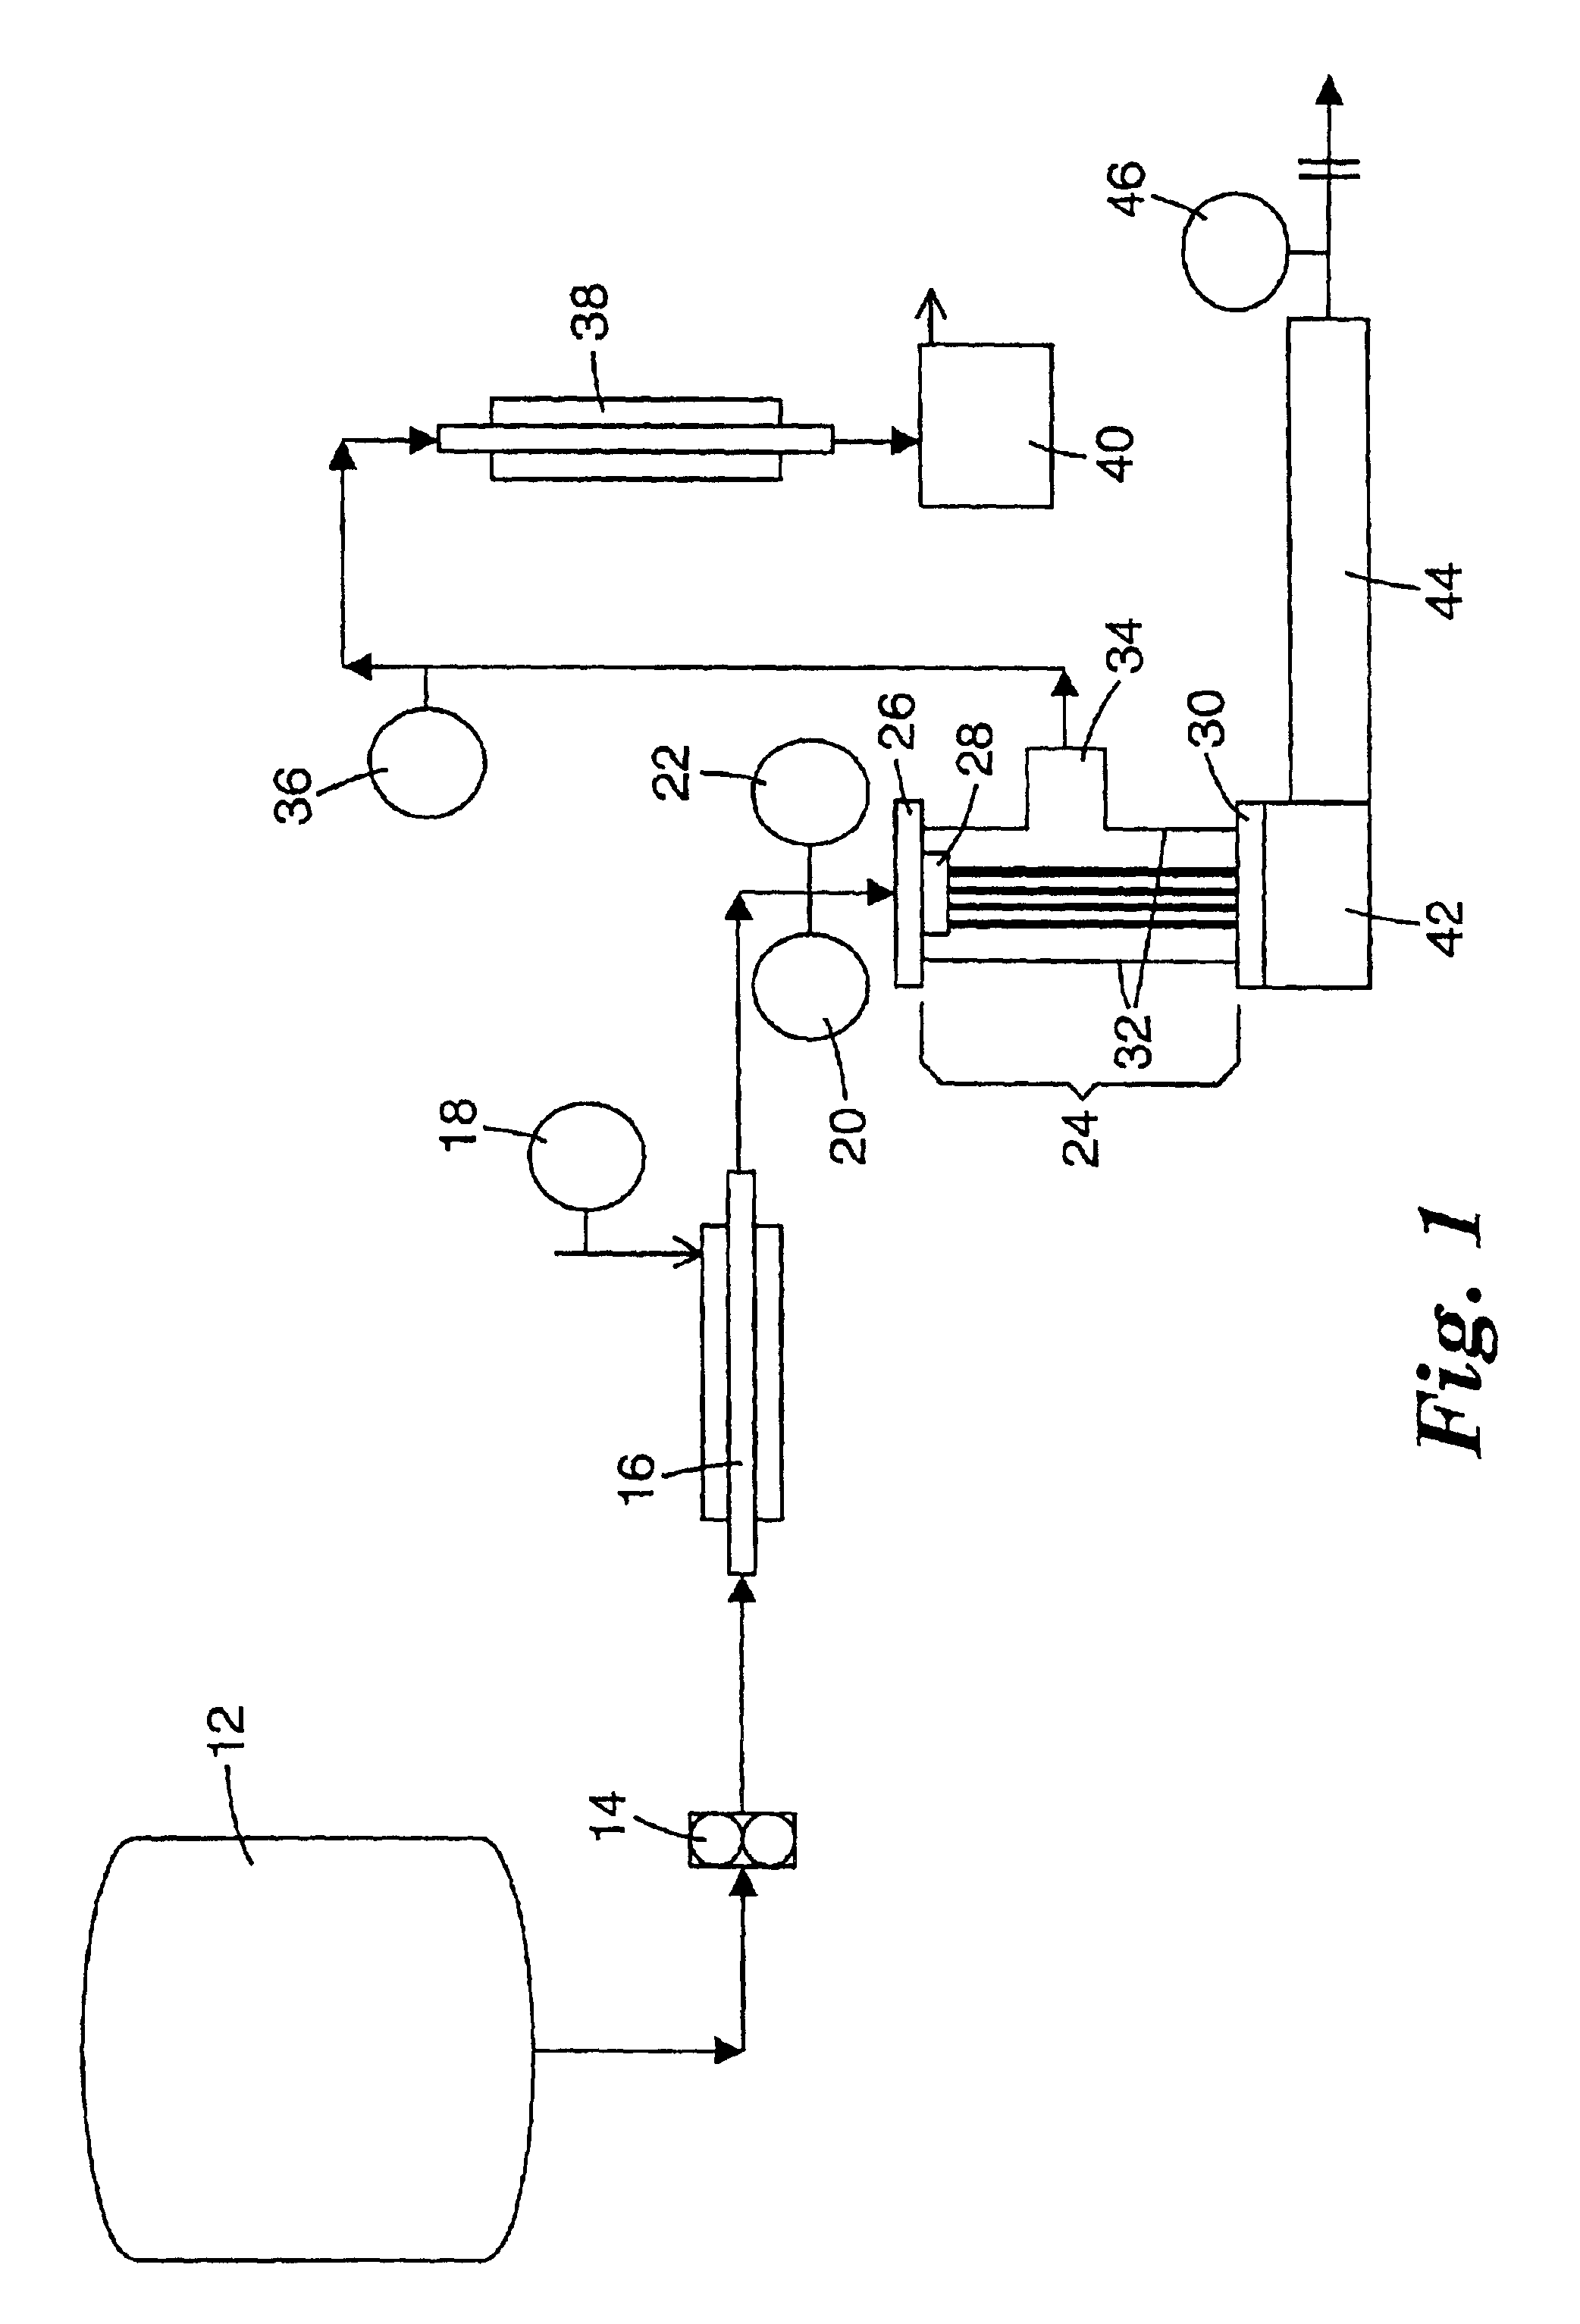 Continuous process for controlled concentration of colloidal solutions